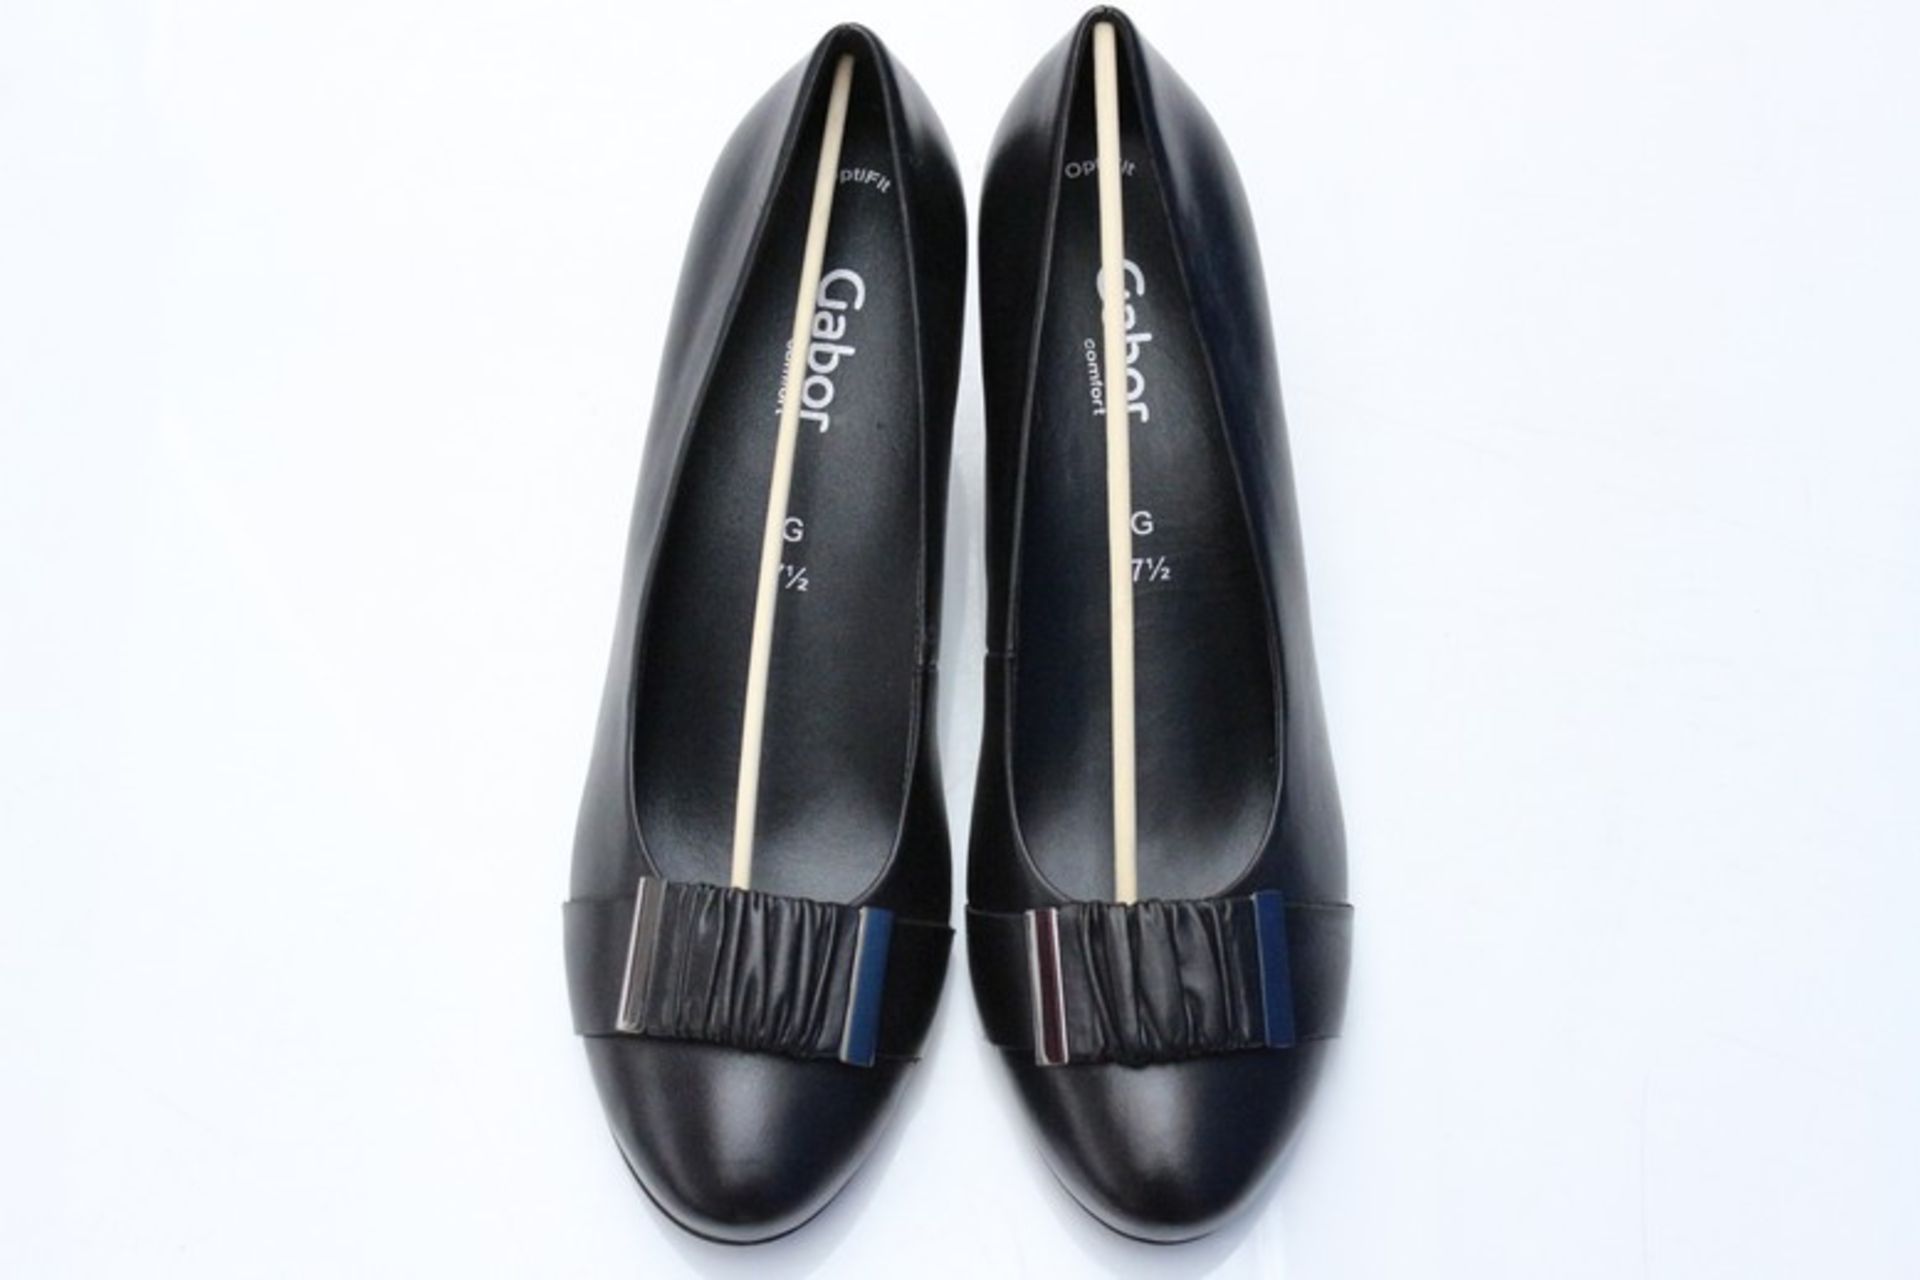 1 x BOXED PAIR OF GABOR SIZE 7 AND A HALF PARKS BLACK HEELED SHOES   *PLEASE NOTE THAT THE BID PRICE